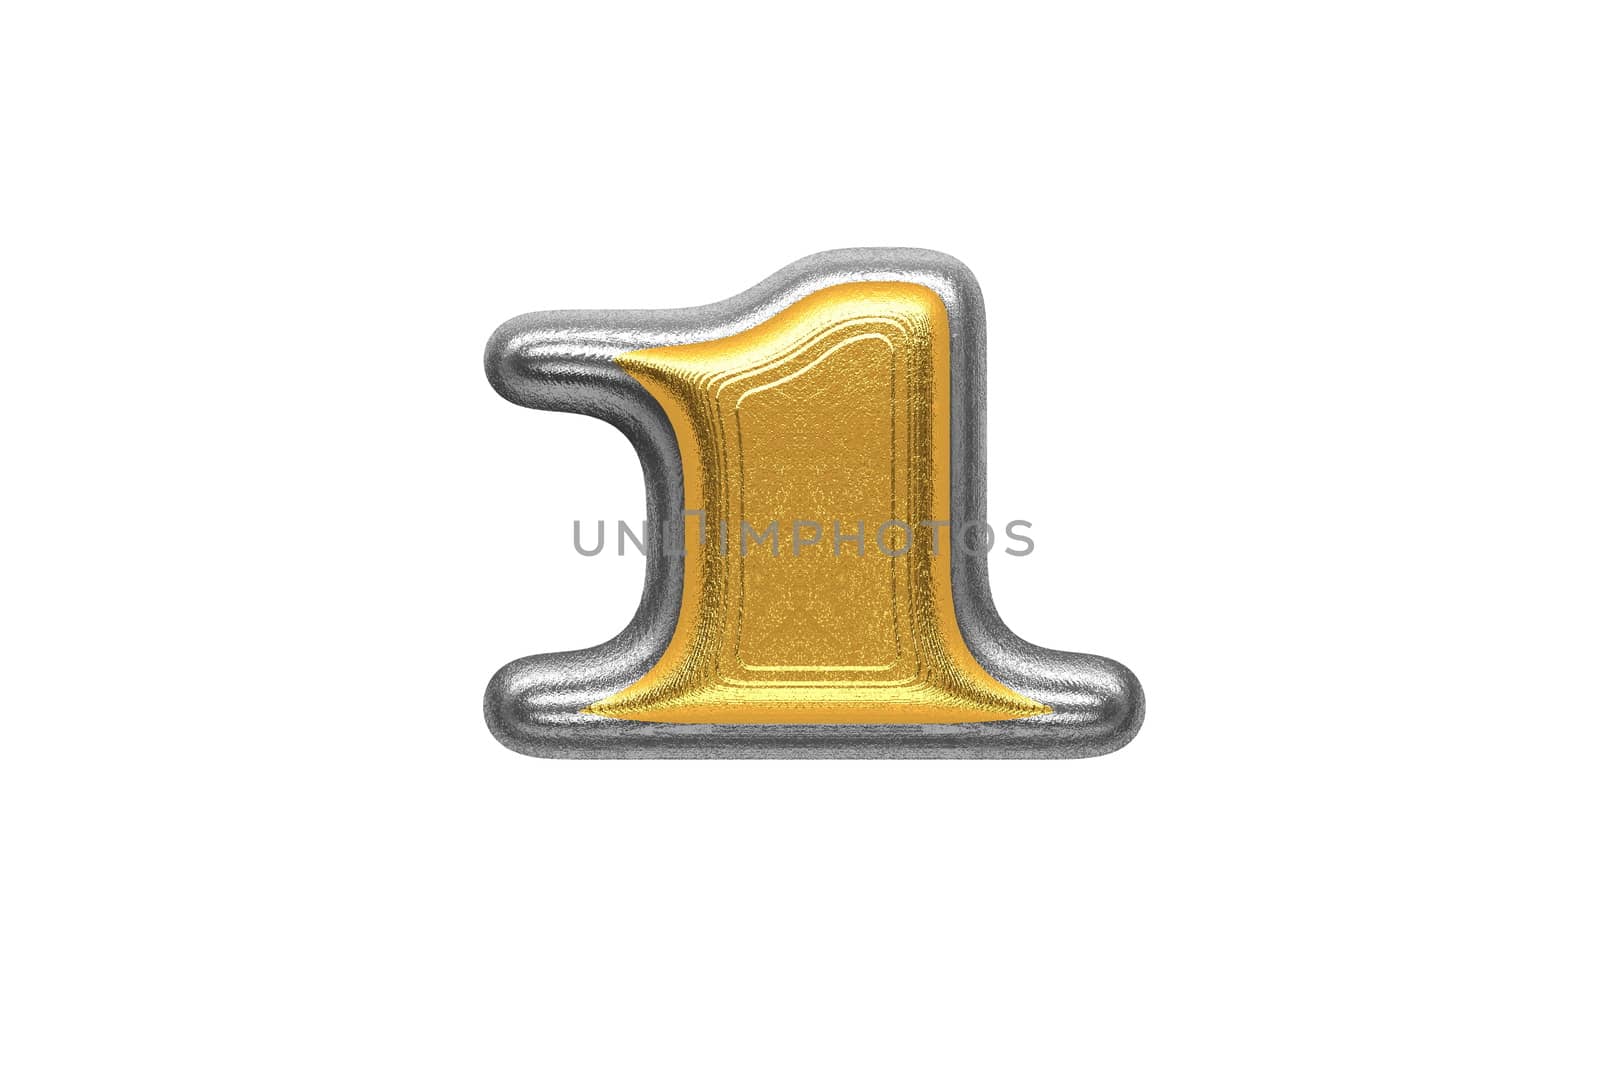 isolated silver figure with gold